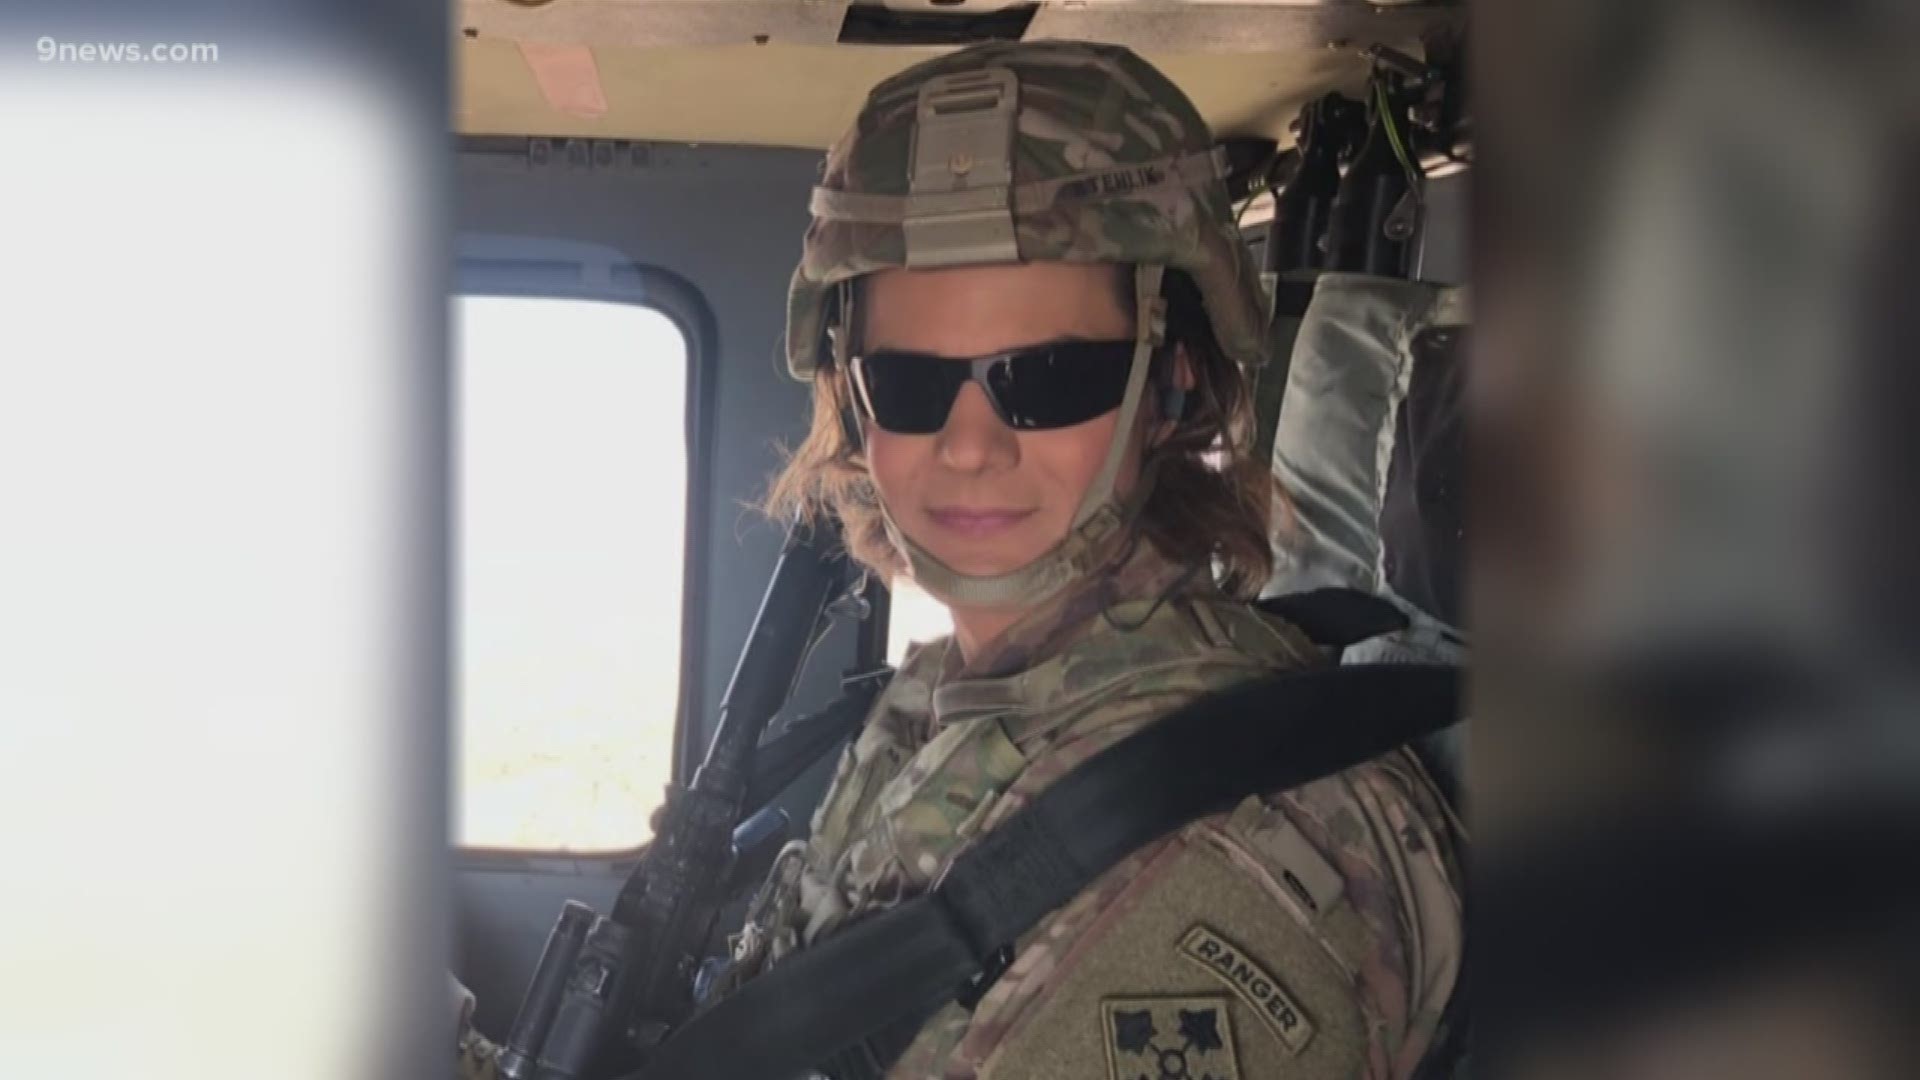 Army Captain Alivia Stehlik is a graduate of West Point, a former infantry platoon leader and a veteran of the War in Afghanistan. She's also a proud transgender woman who's making a difference in the community.